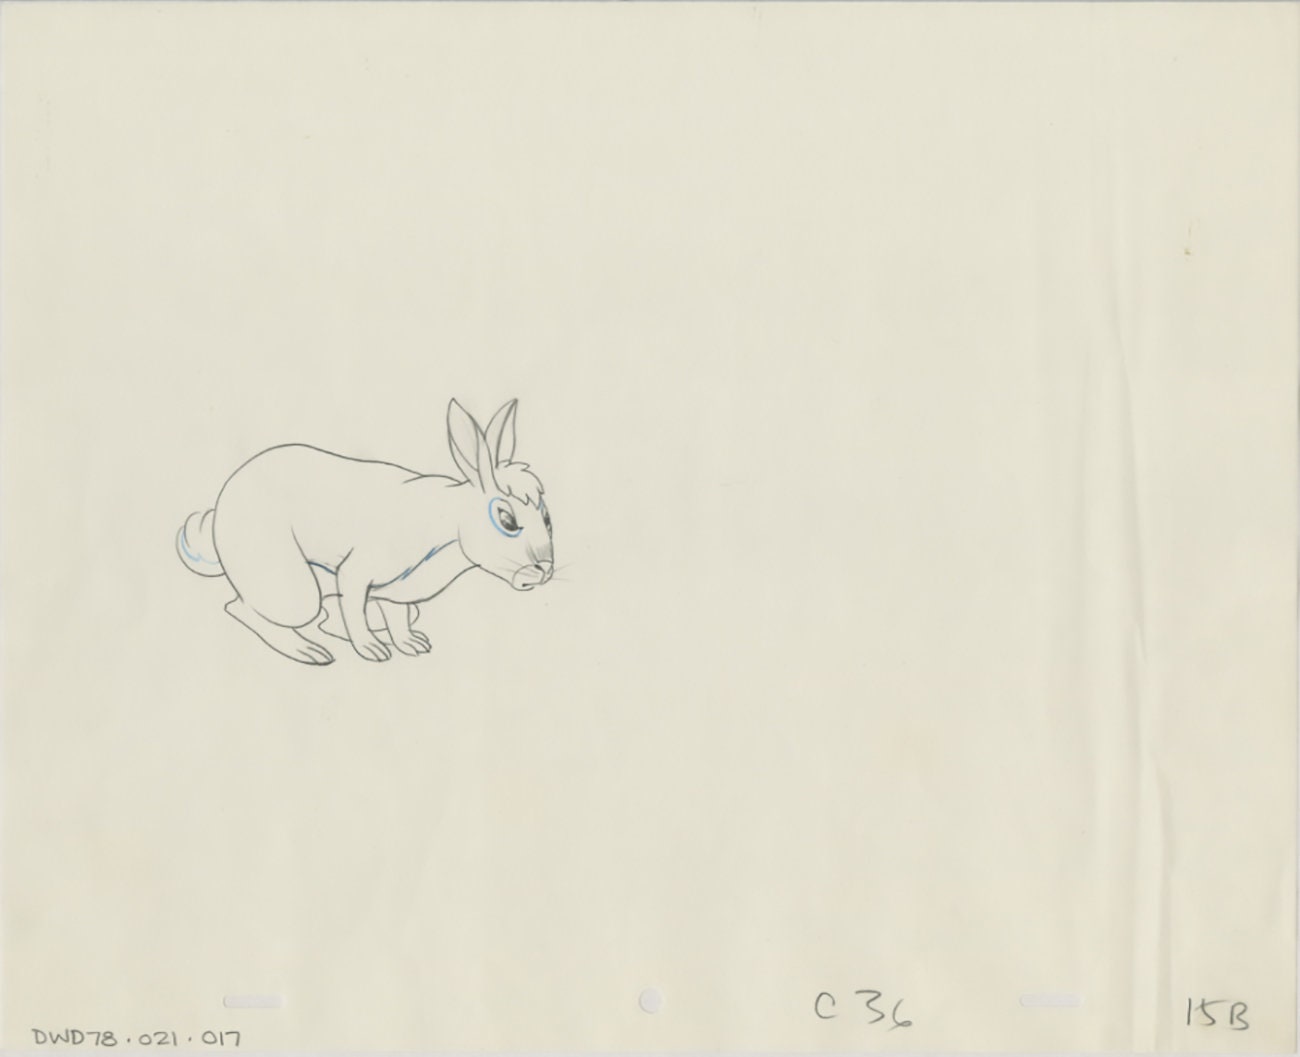 Watership Down 1978 Production Animation Cel Drawing with Linda Jones Enterprise Seal and Certificate of Authenticity 021-017